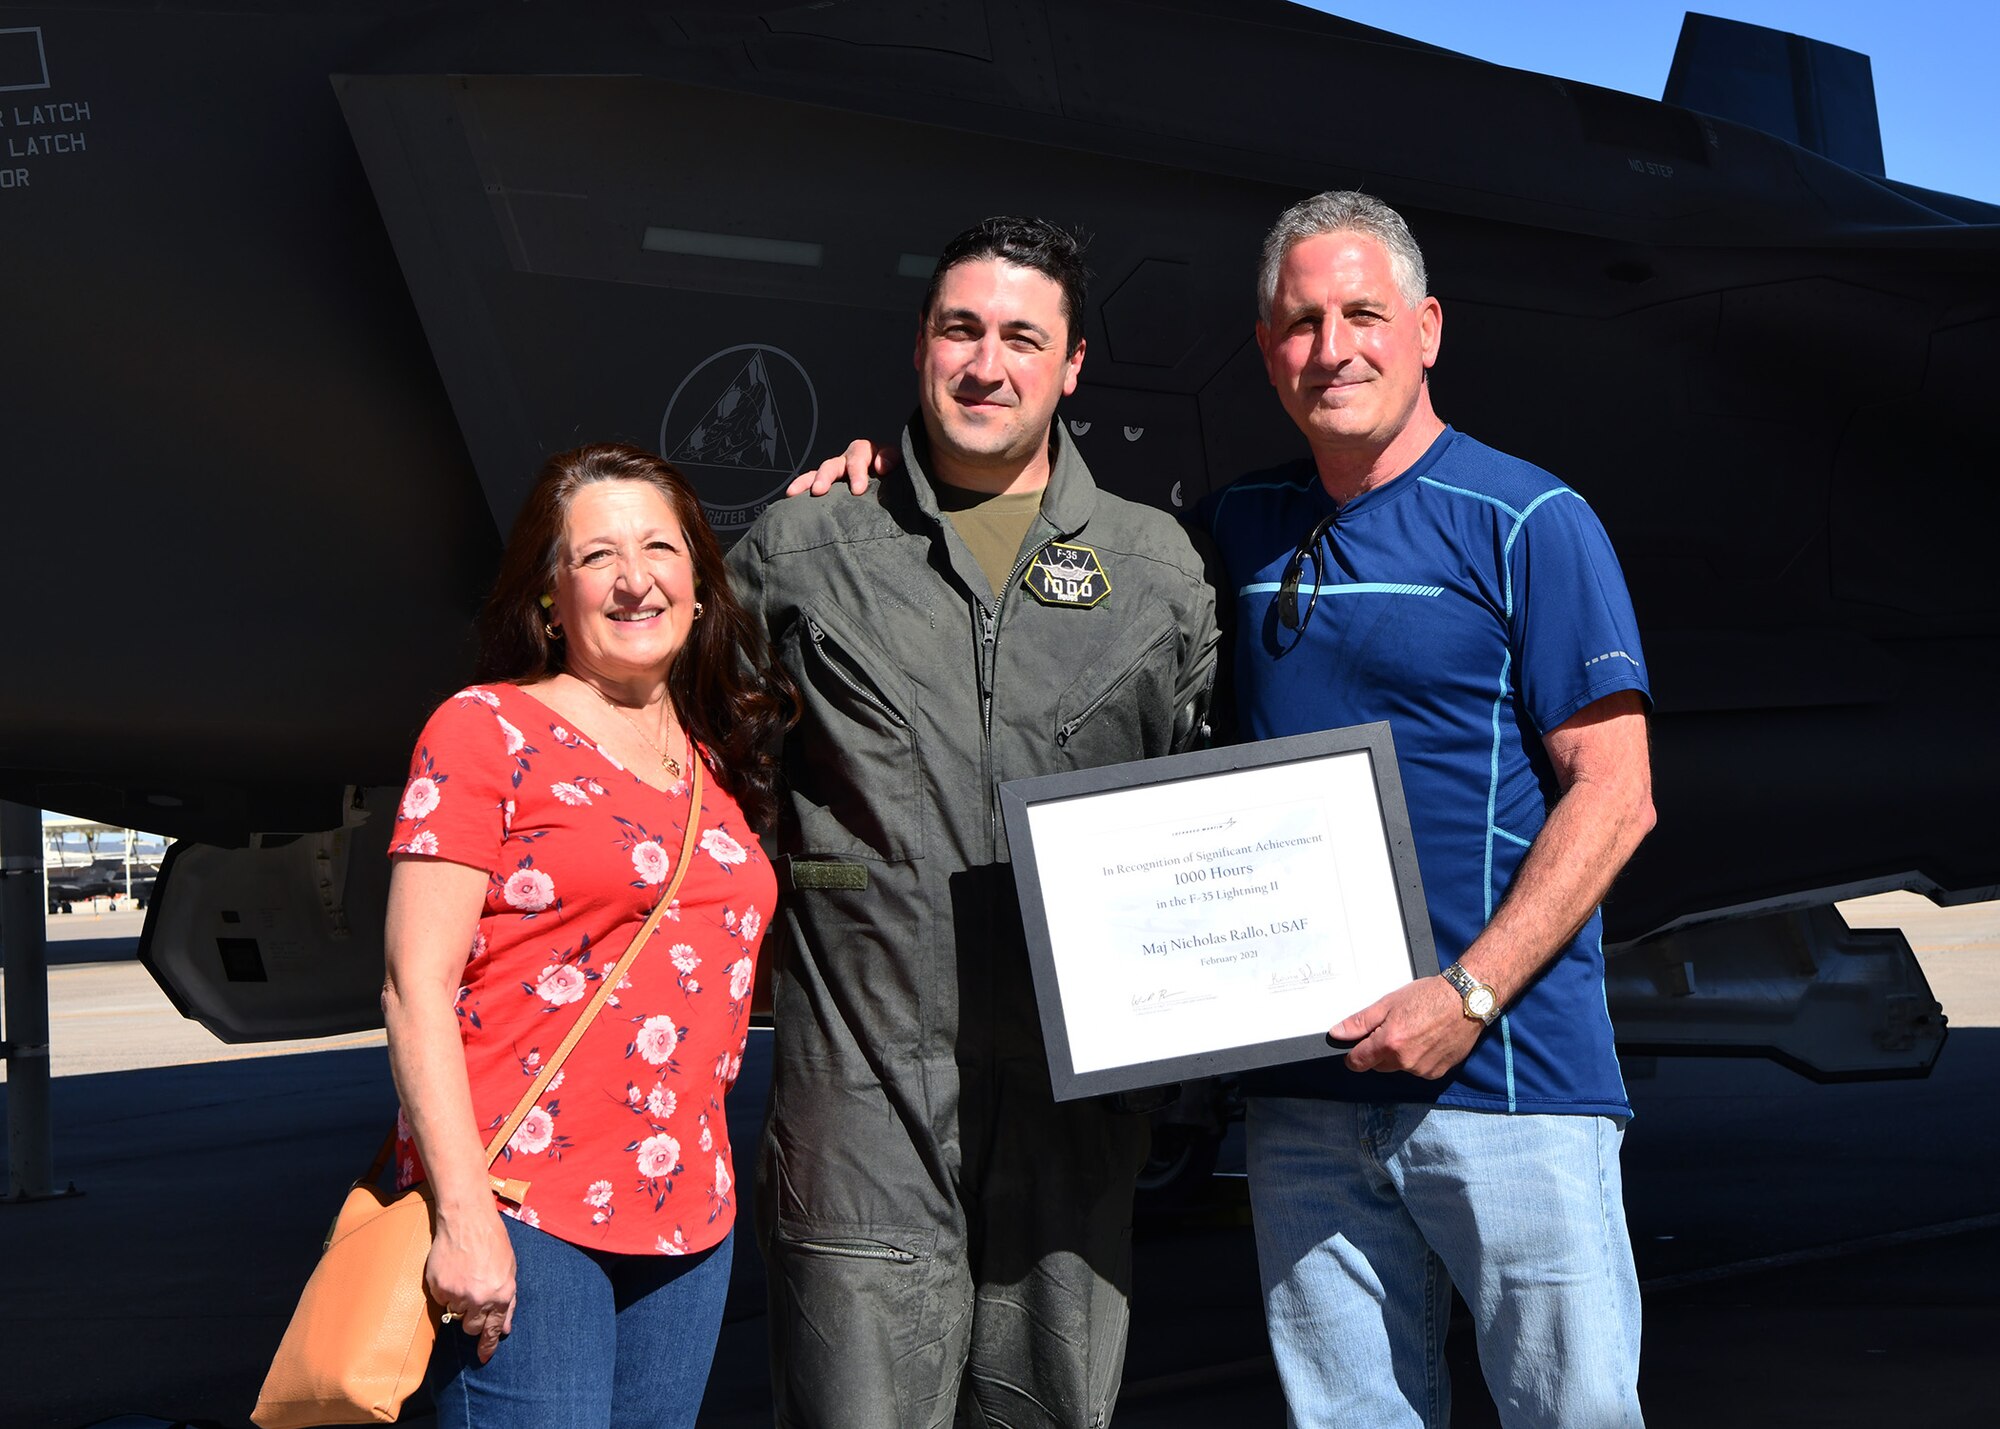 A pilot in the 944th Fighter Wing became the first Luke Air Force Base F-35 pilot to attain 1,000 flying hours in the Air Force’s newest 5th generation fighter aircraft here, February 22, 2021.